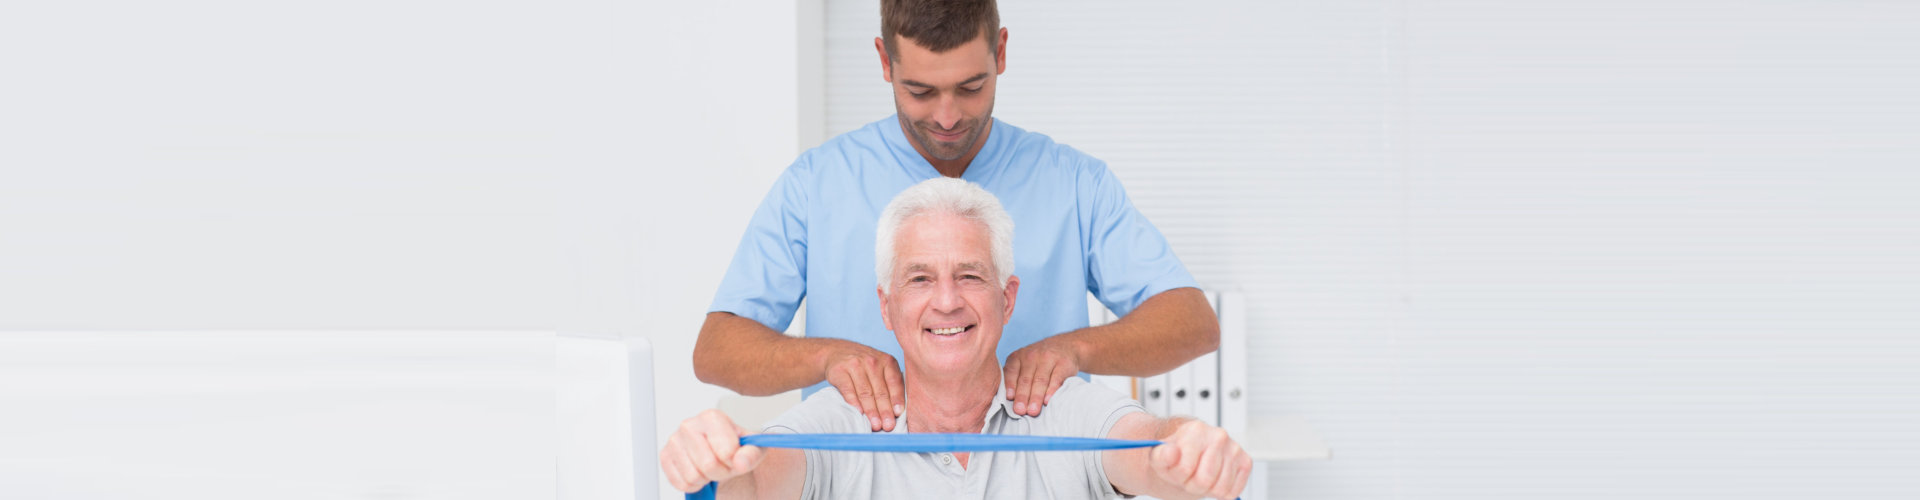 male physiotherapist assisting senior man in exercising with resistance band